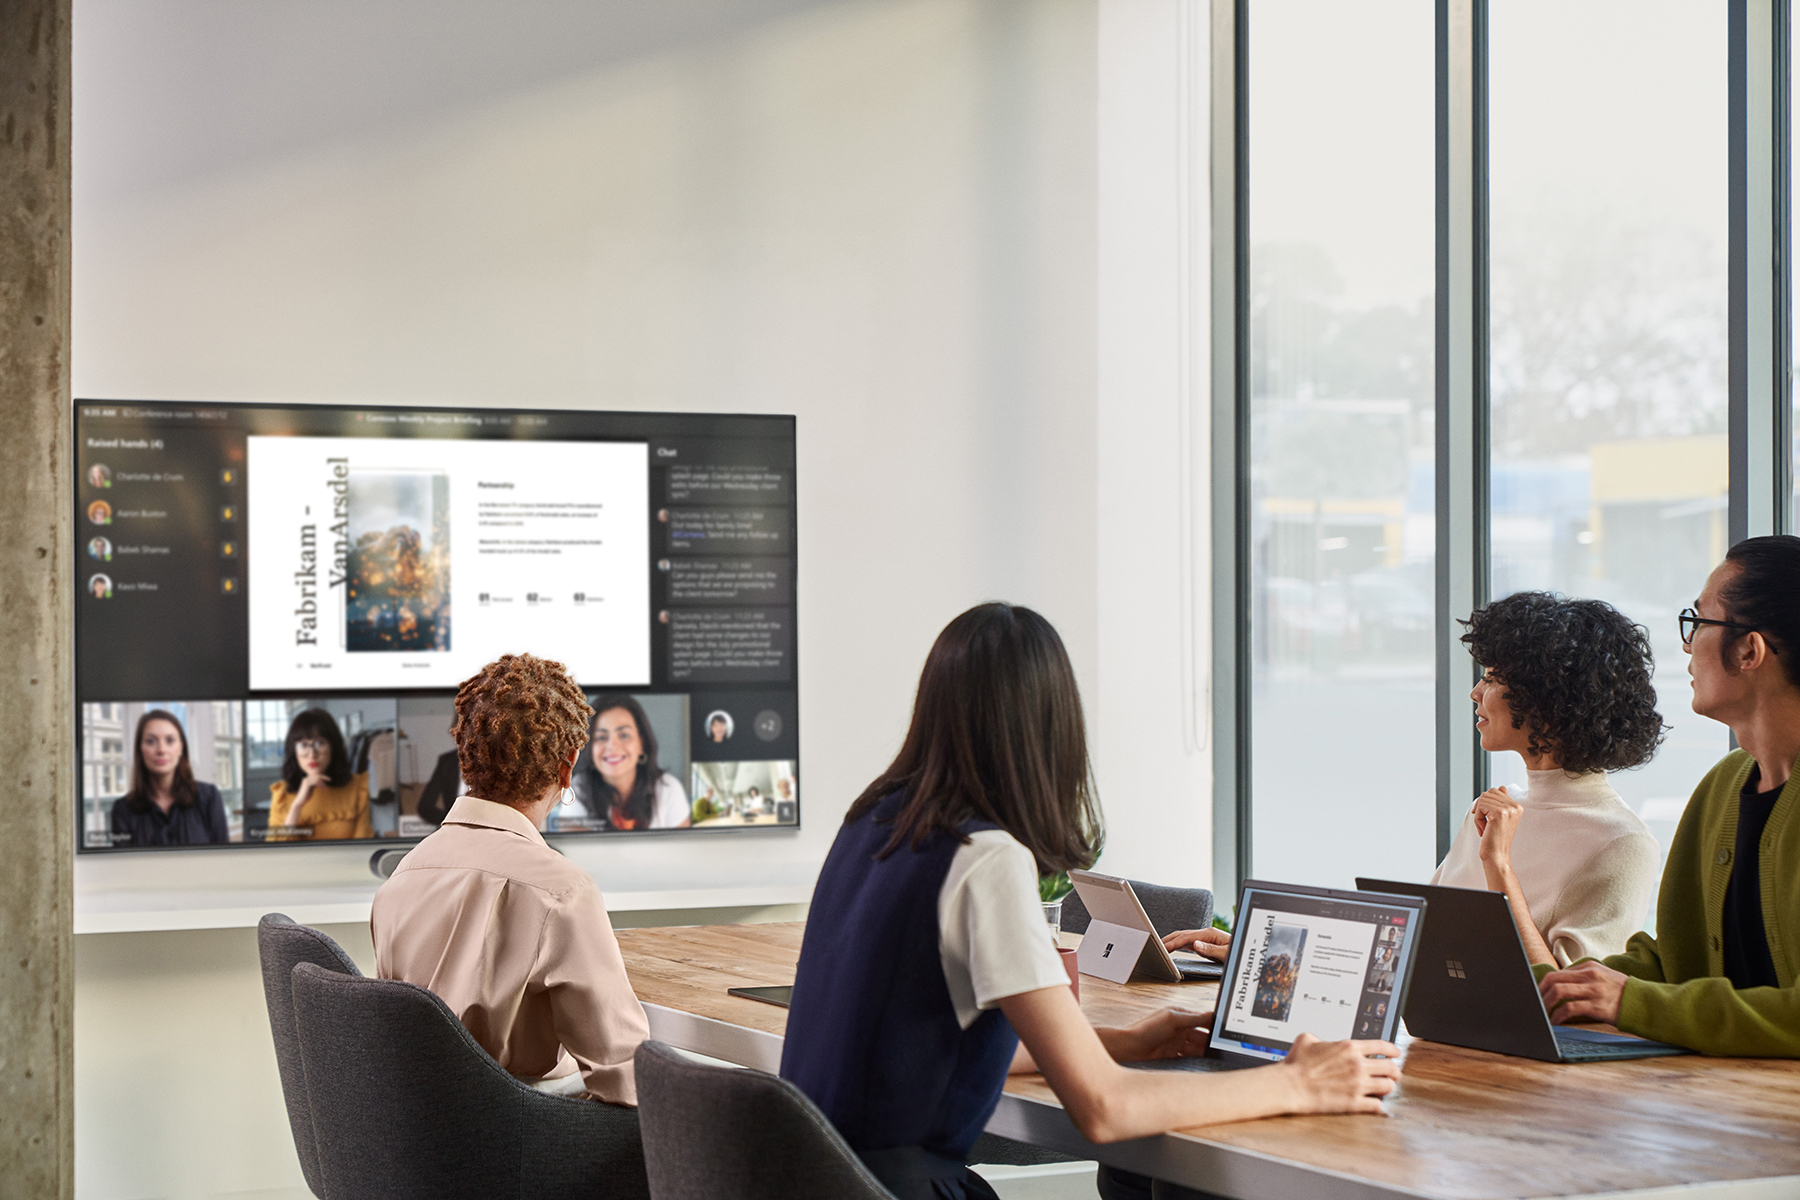 Remote attendees participate in a Microsoft Teams Room meeting